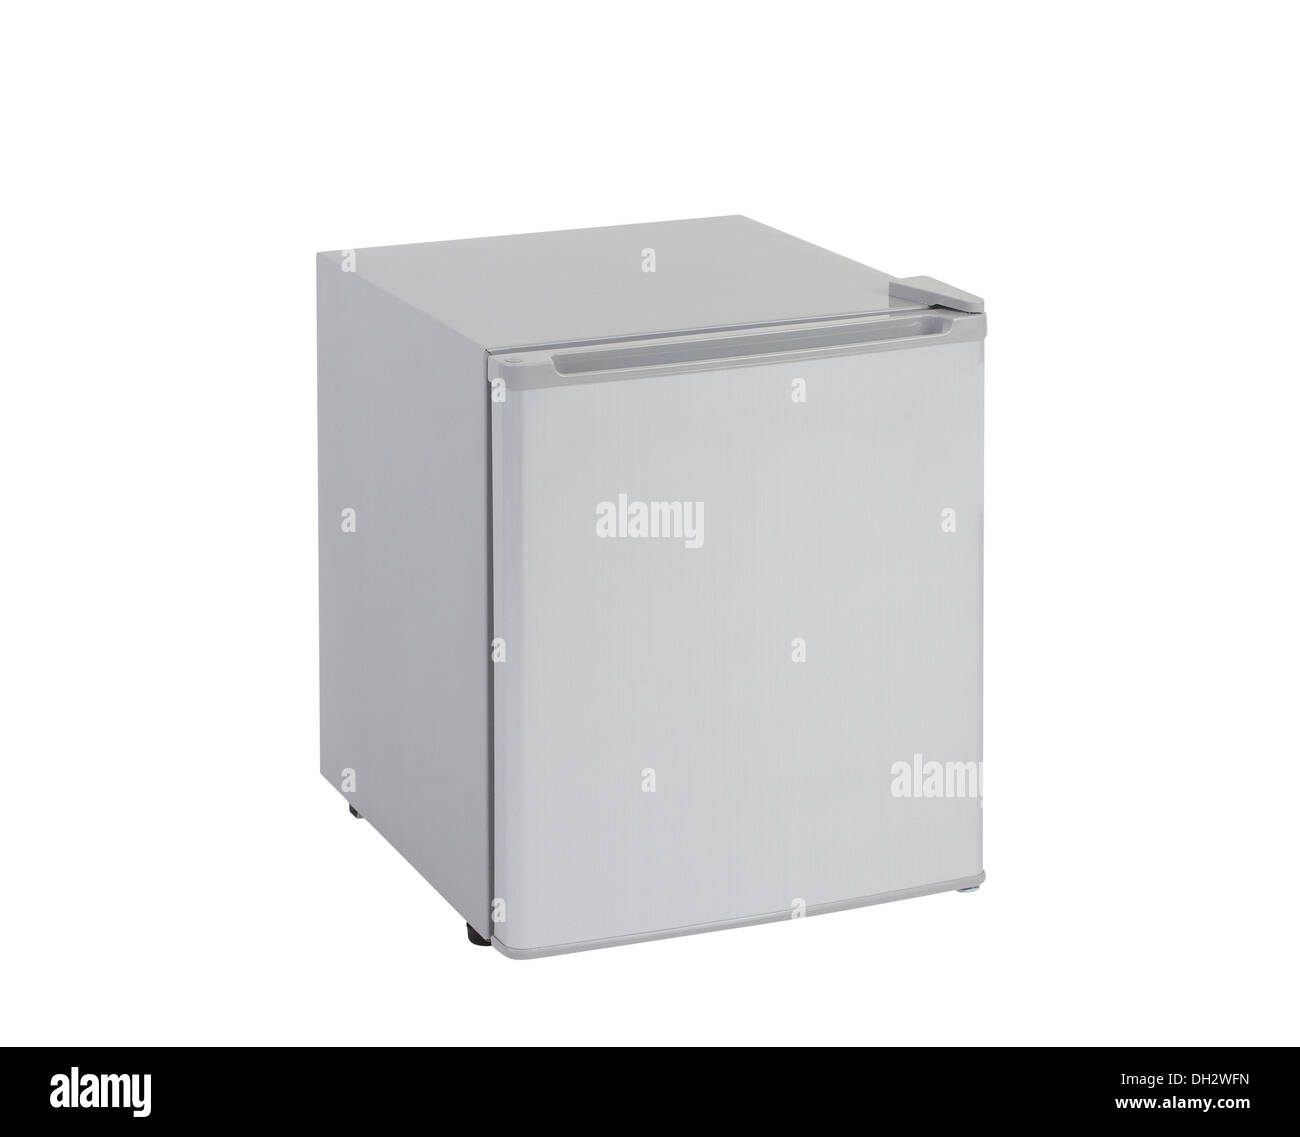 Small gray refrigerator isolated on white background Stock Photo